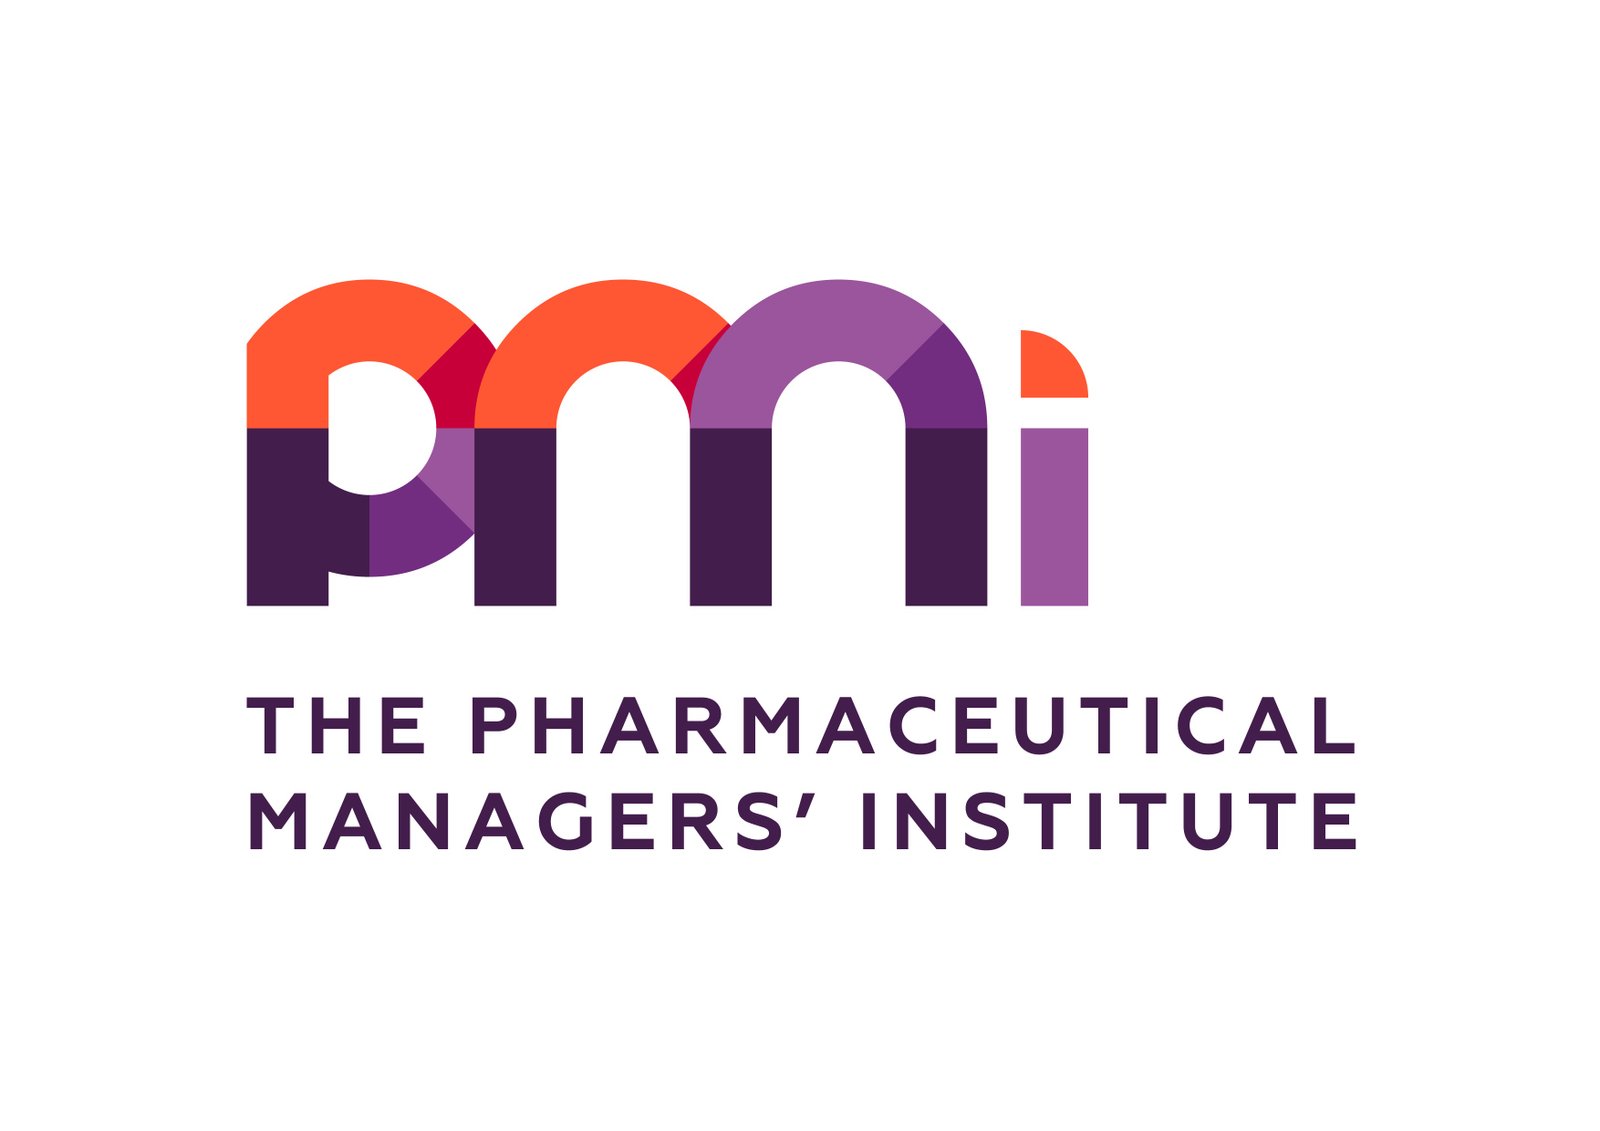 The Pharmaceutical Managers' Institute of Ireland